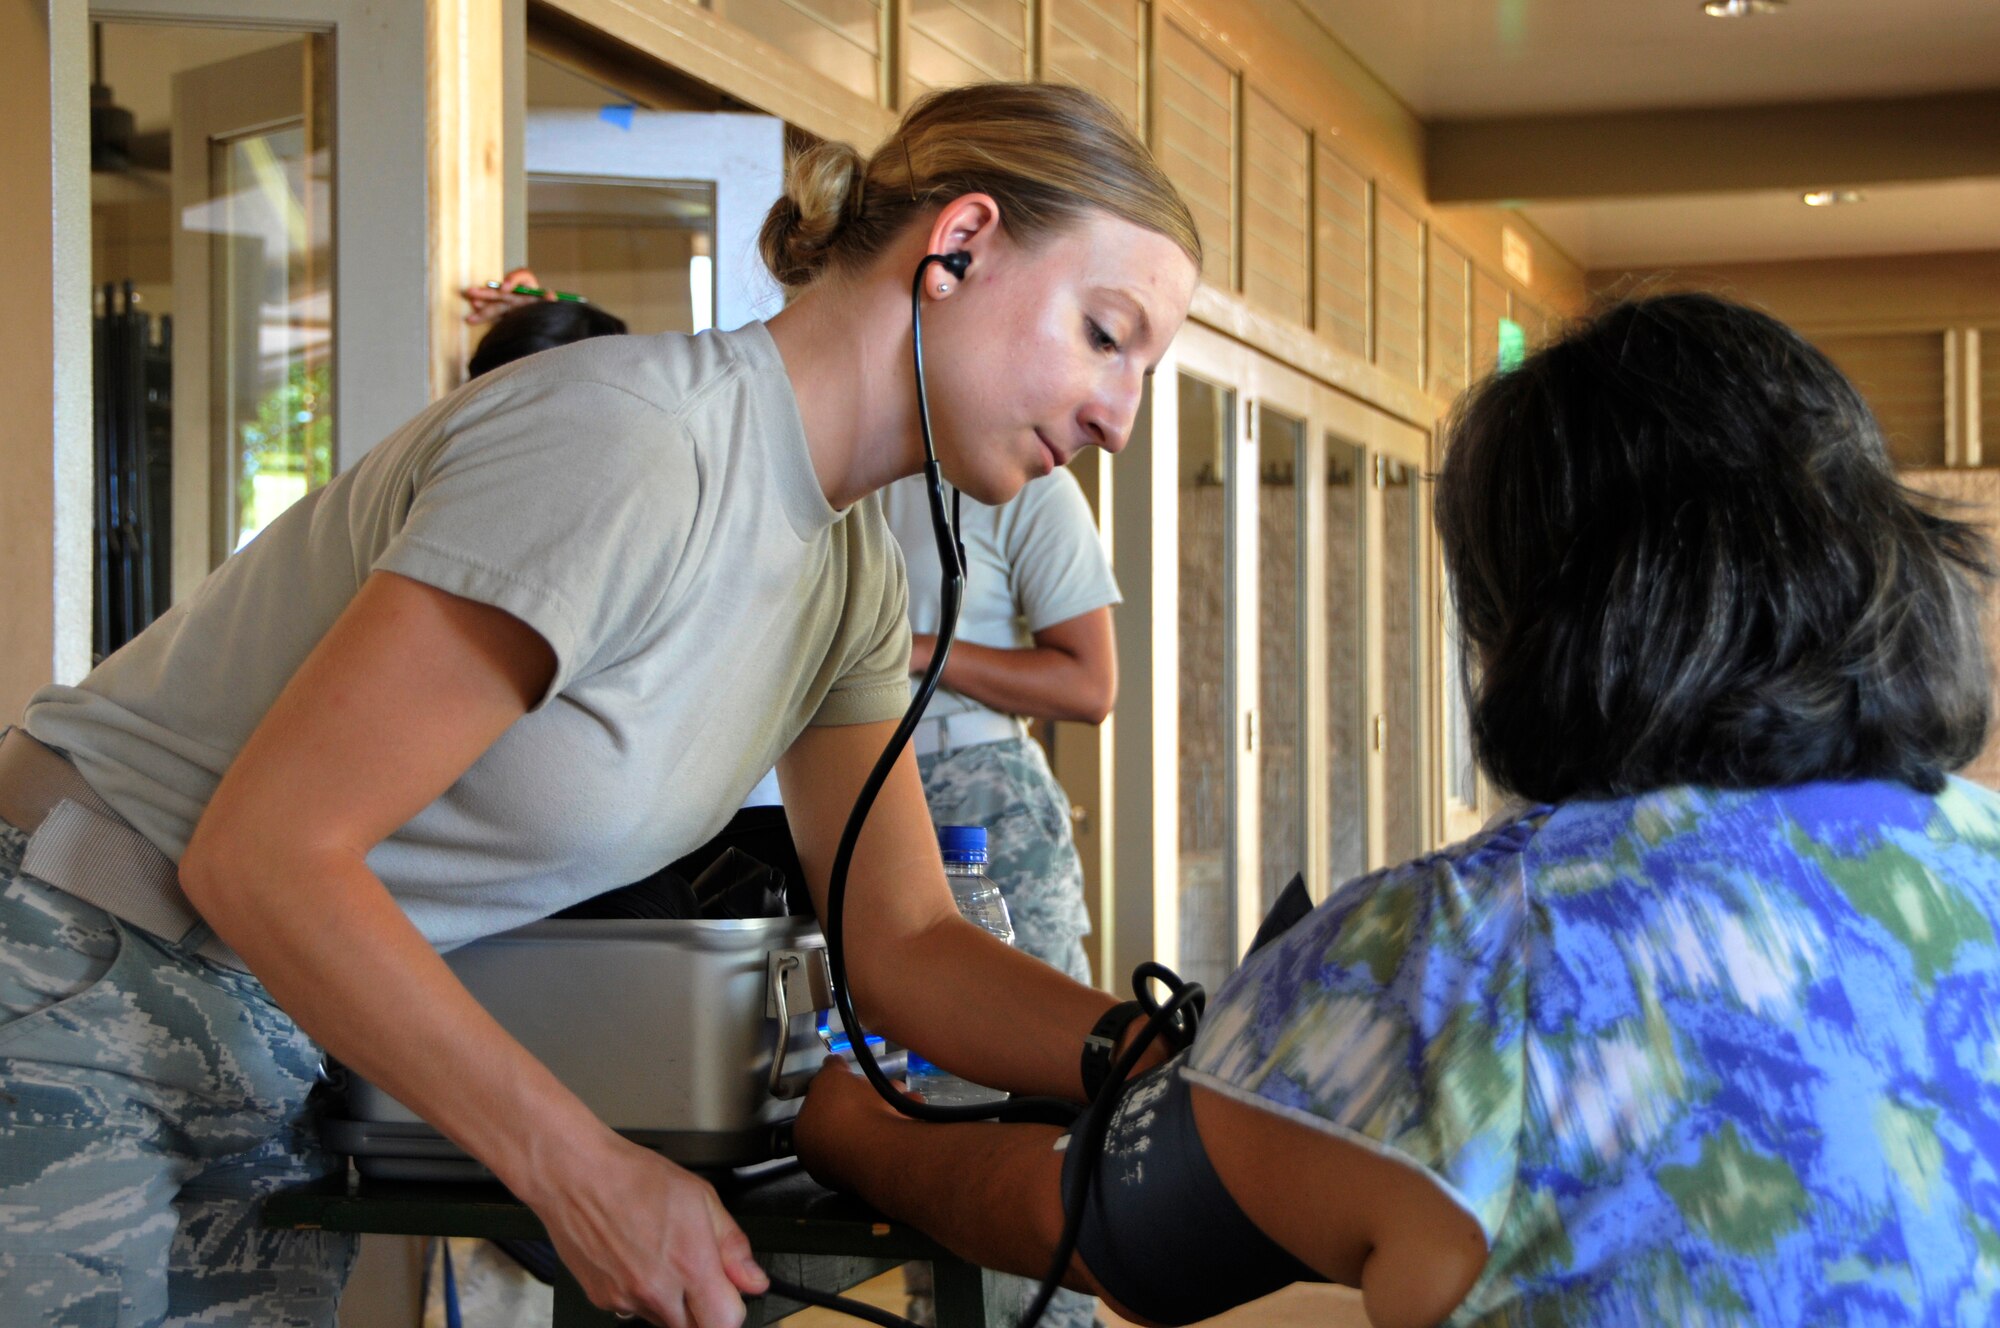 U.S. Air Force Senior Airman Laura Sellers, a medical technician assigned to the 193rd Medical Group, Pennsylvania Air National Guard, takes a community member's blood pressure at the Mitchell Pauole Community Center, Molokai, Hawaii, during Tropic Care Maui County 2018, Aug. 11, 2018. (U.S. Air National Guard photo by Staff Sgt. Lonnie Wiram)